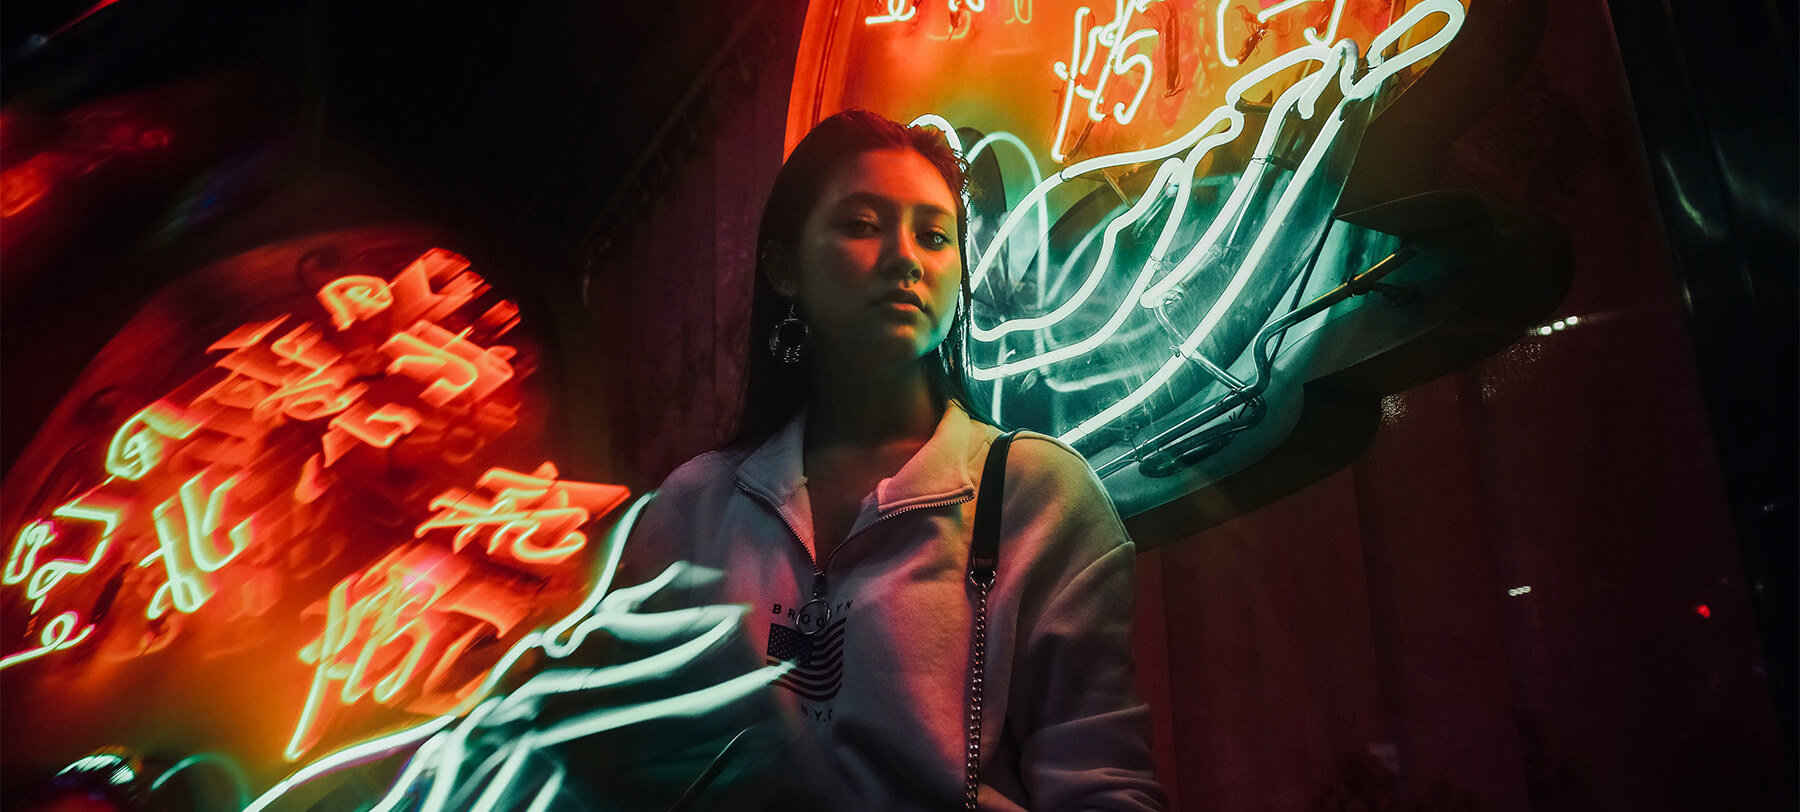 Stadion Alle slags berolige How to capture dazzling neon street portraits - Photography News